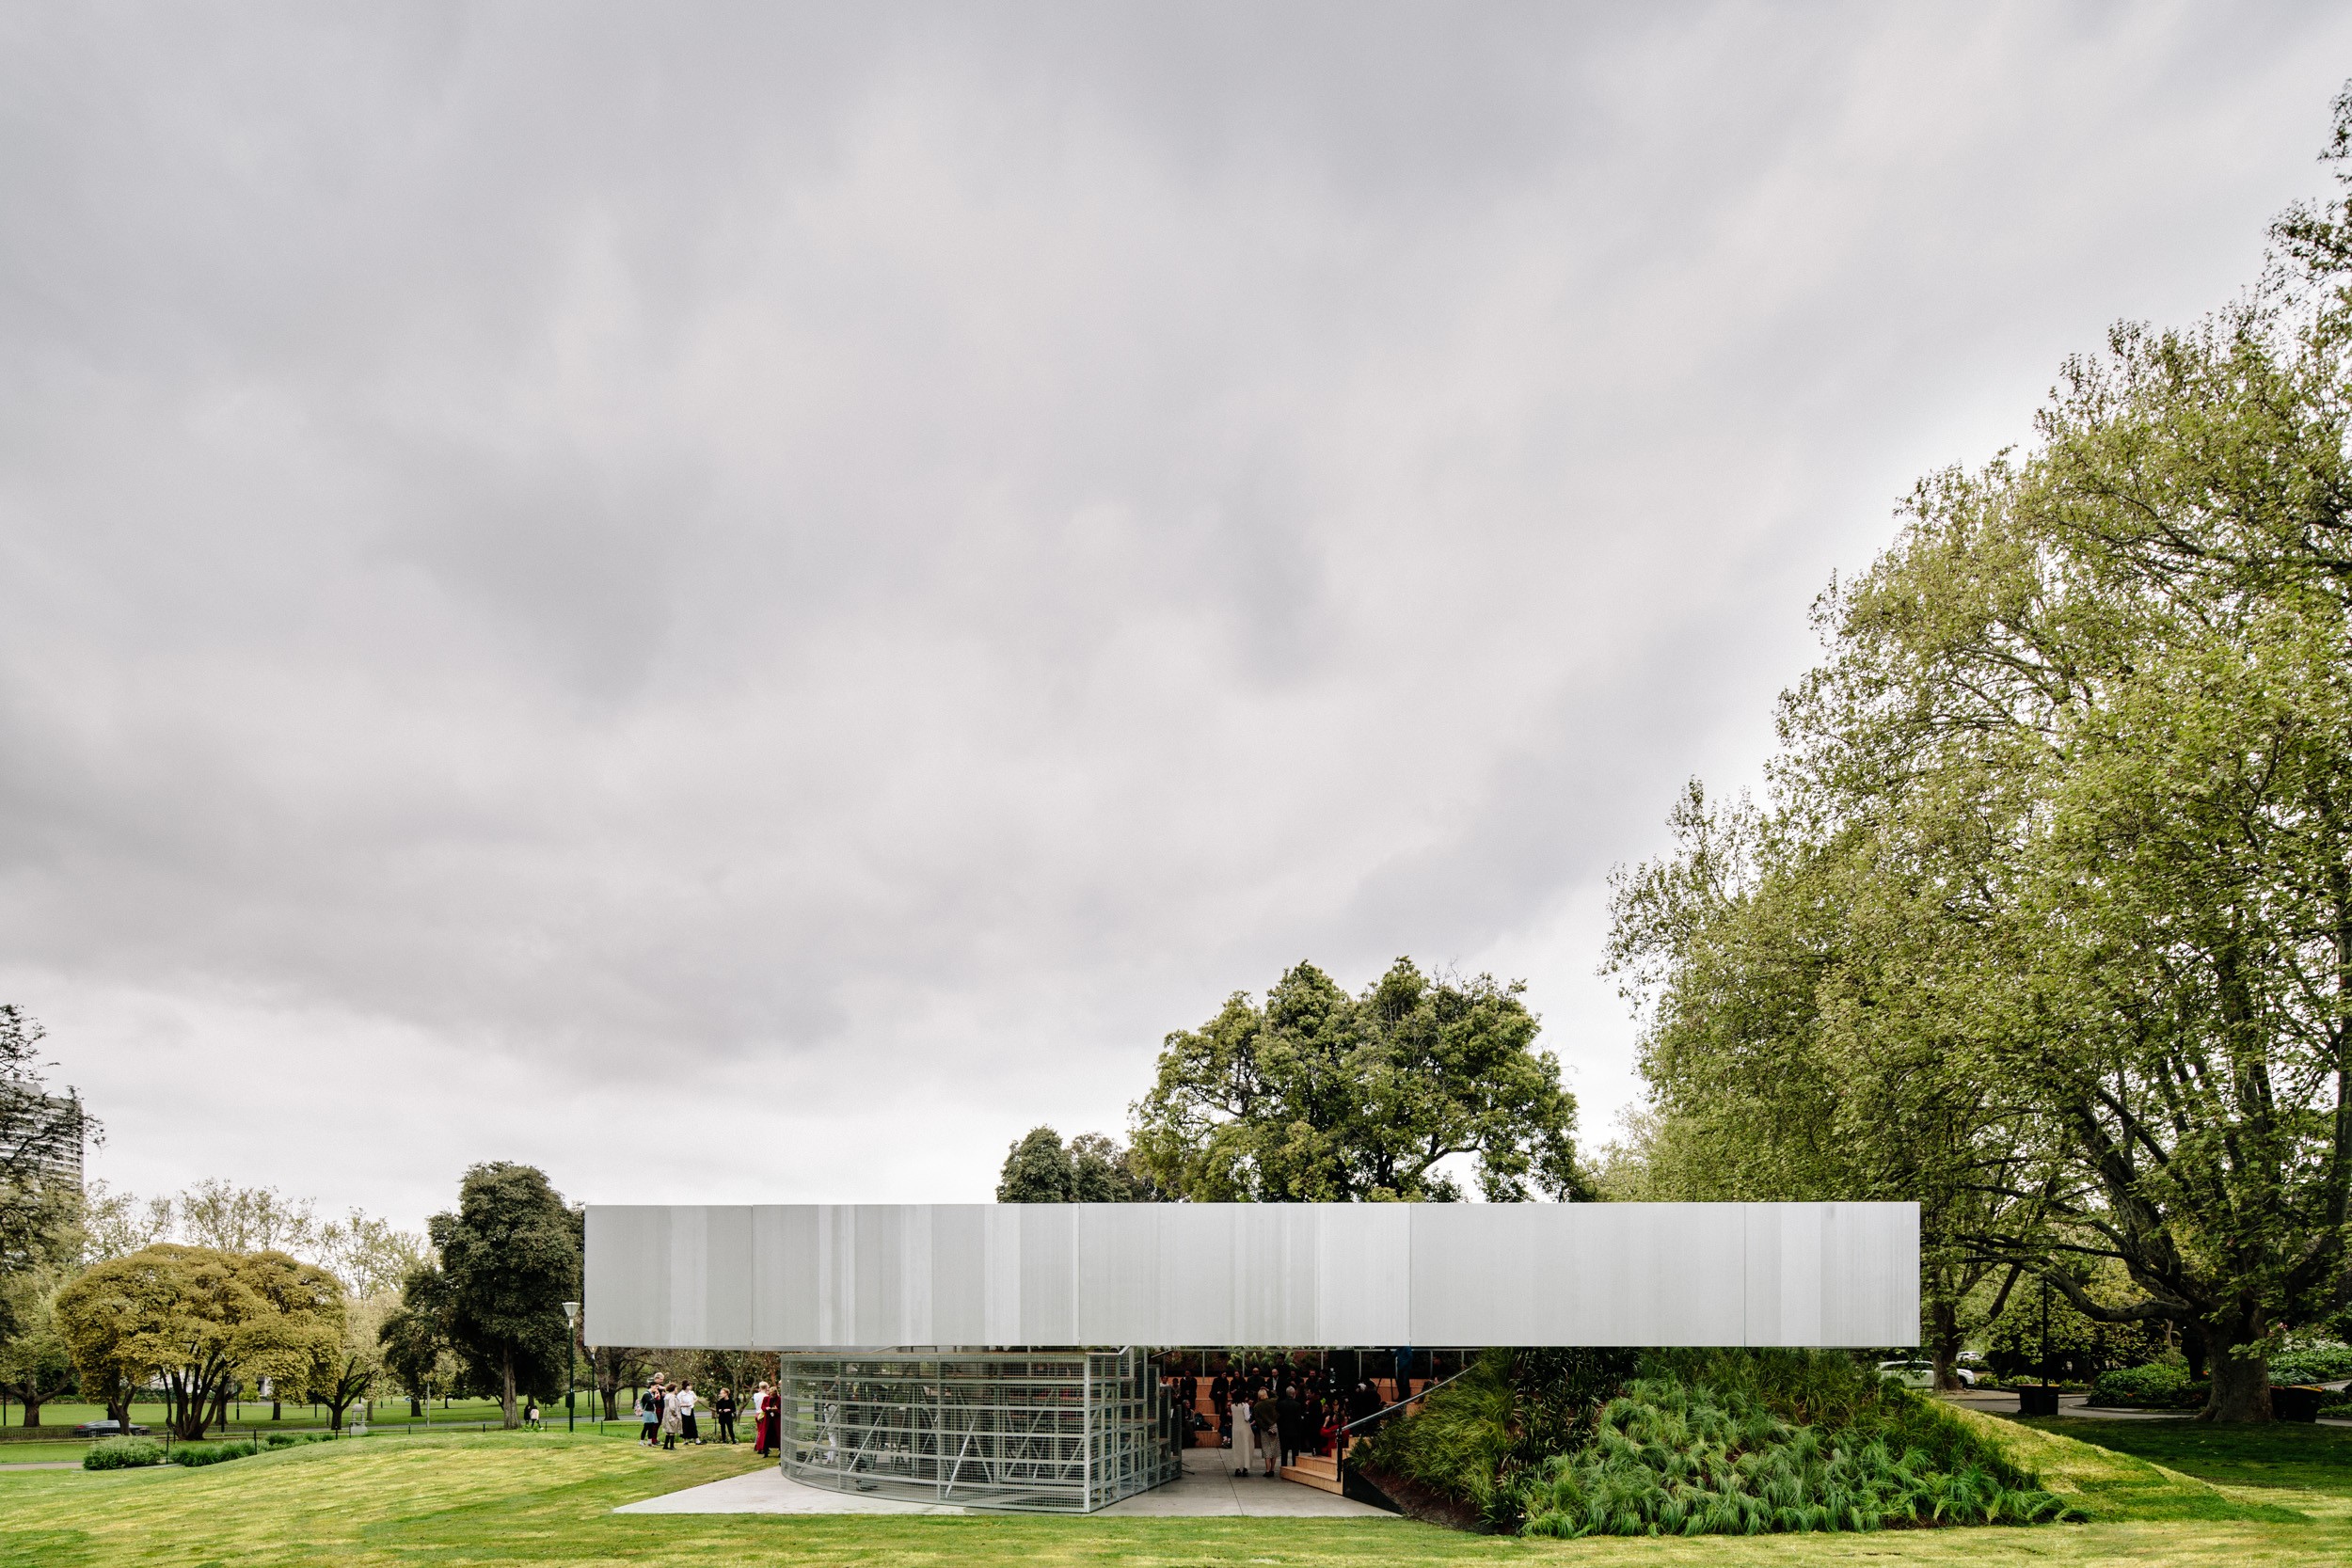 Designed by Rem Koolhaas’ architecture firm OMA, the latest MPavilion is the fourth in a series erected in Melbourne’s Queen Victoria Gardens. Photo: Timothy Burgess